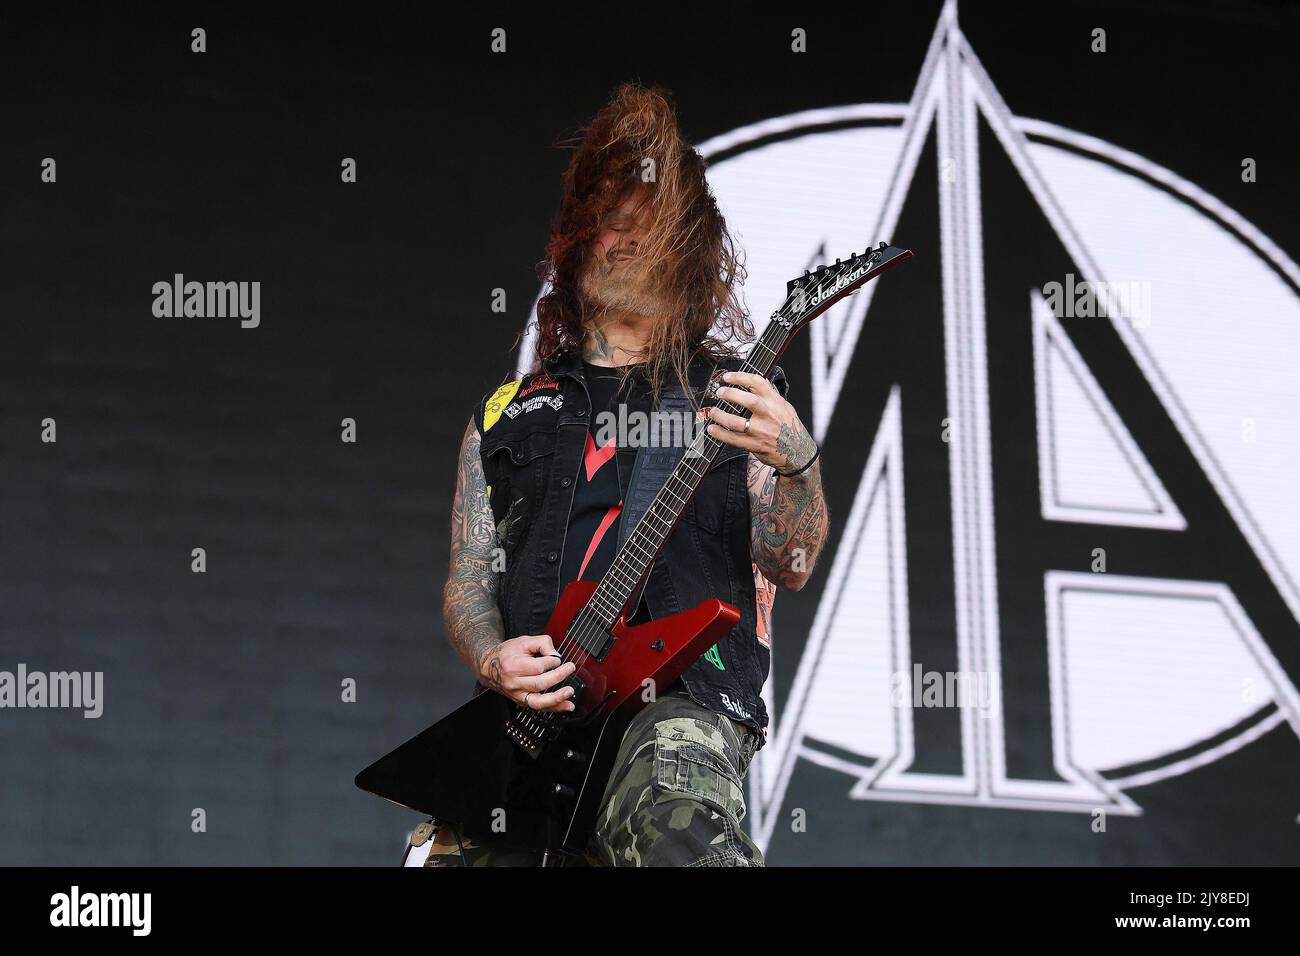 Rio de Janeiro, Brazil,September 2, 2022. Guitarist Phil Demmel during a concert by the American heavy metal band Metal Allegiance at Rock in Rio 2022 Stock Photo